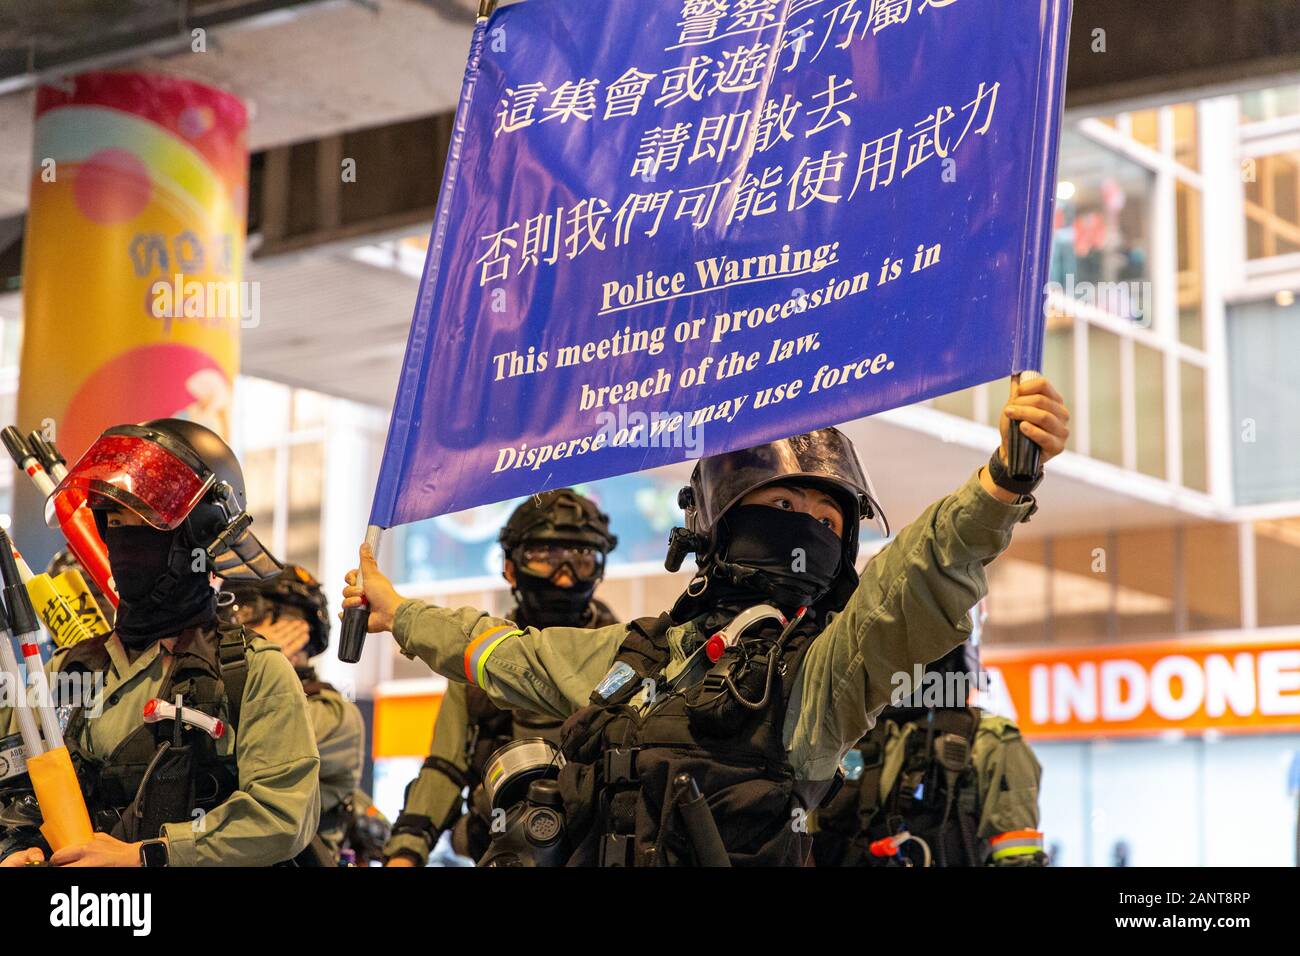 Hong Kong, China. 19th Jan, 2020. Police hold up warning for the crowd to disperse. Next warning is A black flag before tear gas is used. Hong Kong Protest - Universal Seige on Communists Rally at Chater Garden, Central, Hong Kong. Credit: David Ogg/Alamy Live News Stock Photo